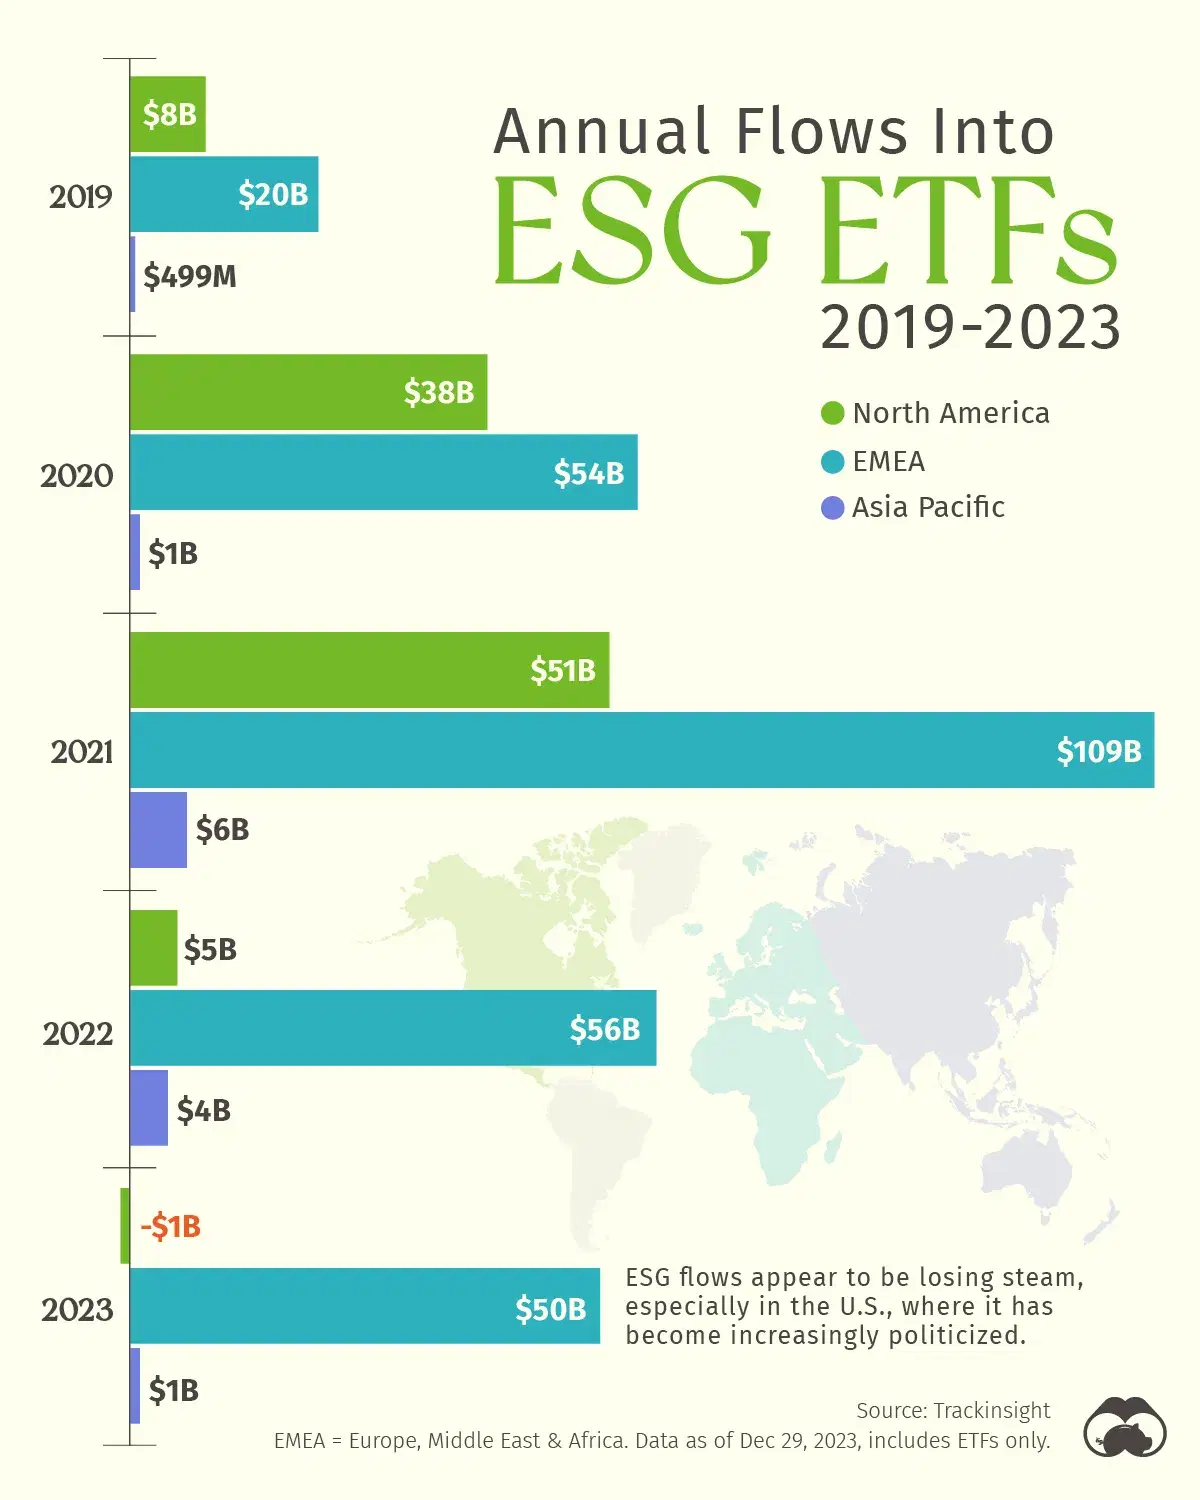 North American Investors Pulled Money Out of ESG ETFs in 2023